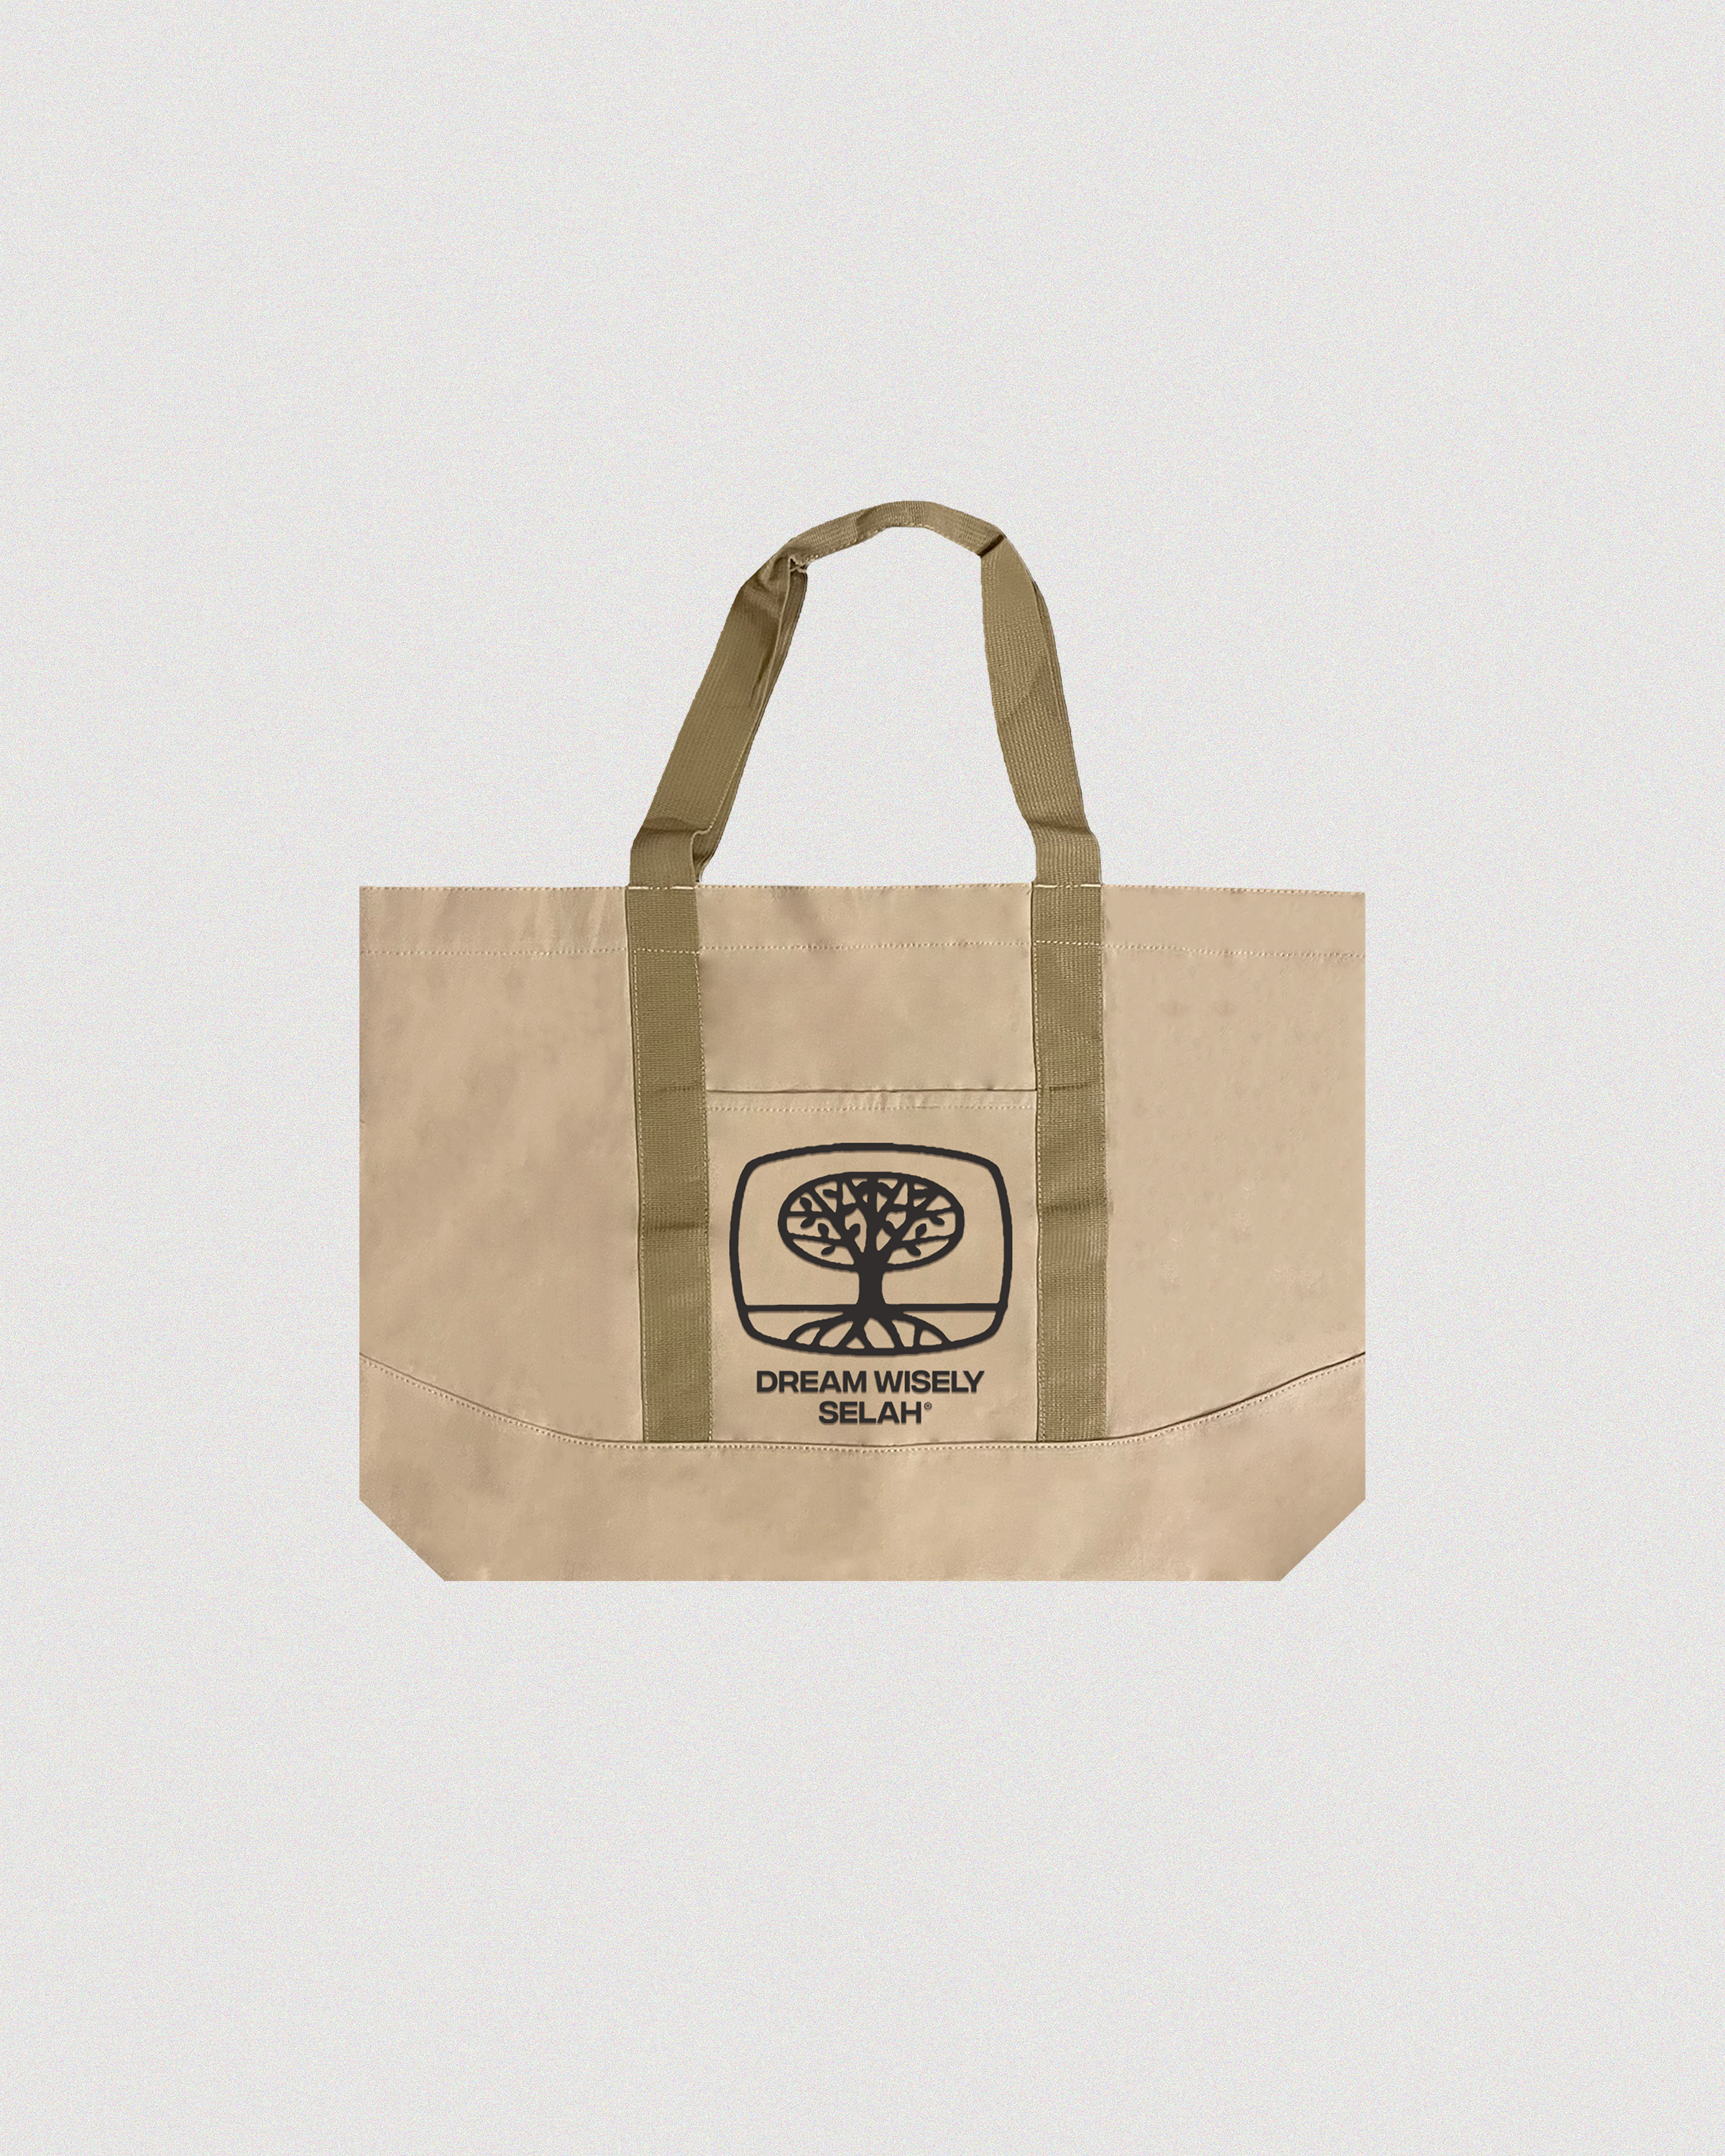 "DREAM WISELY" UTILITY TOTE BAG